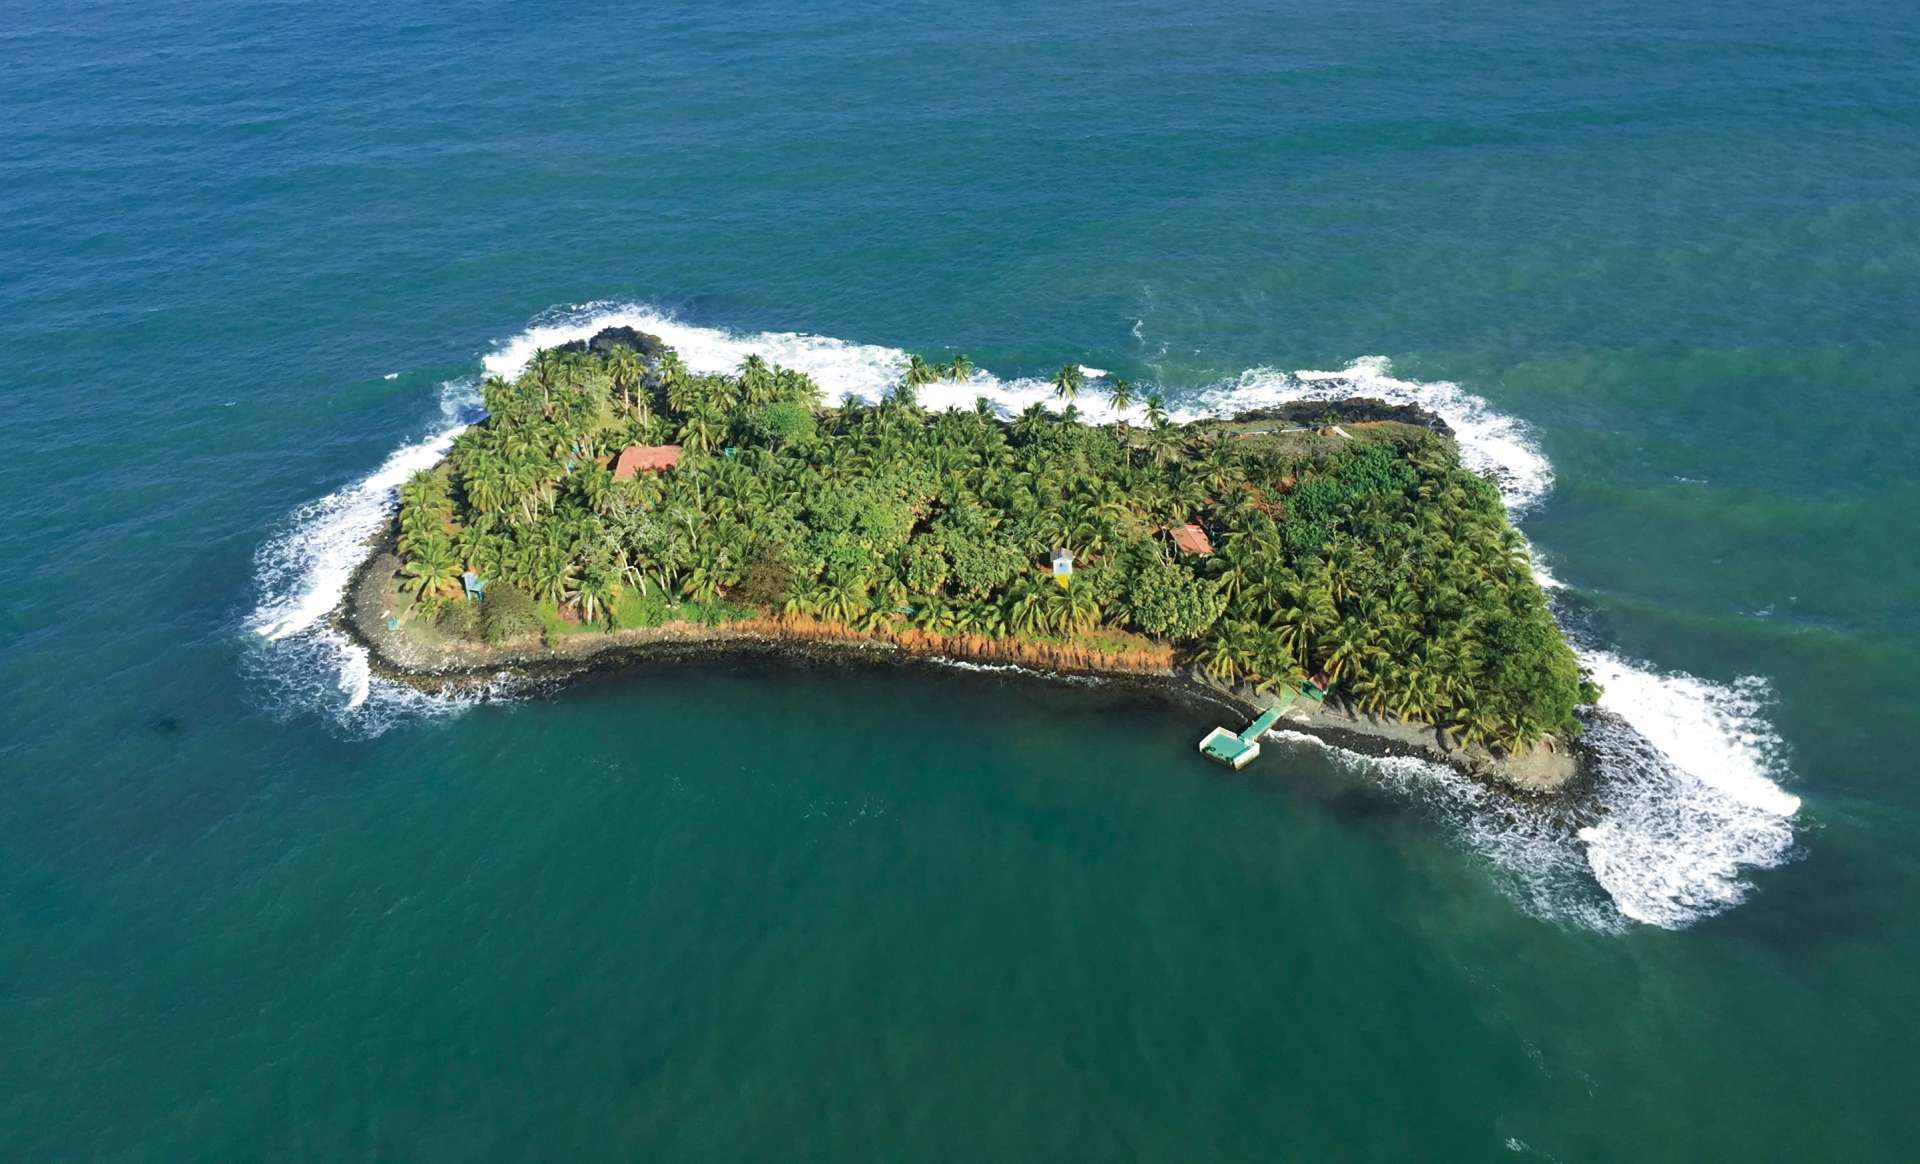 Private Islands Inc - Islands for Sale and Rent